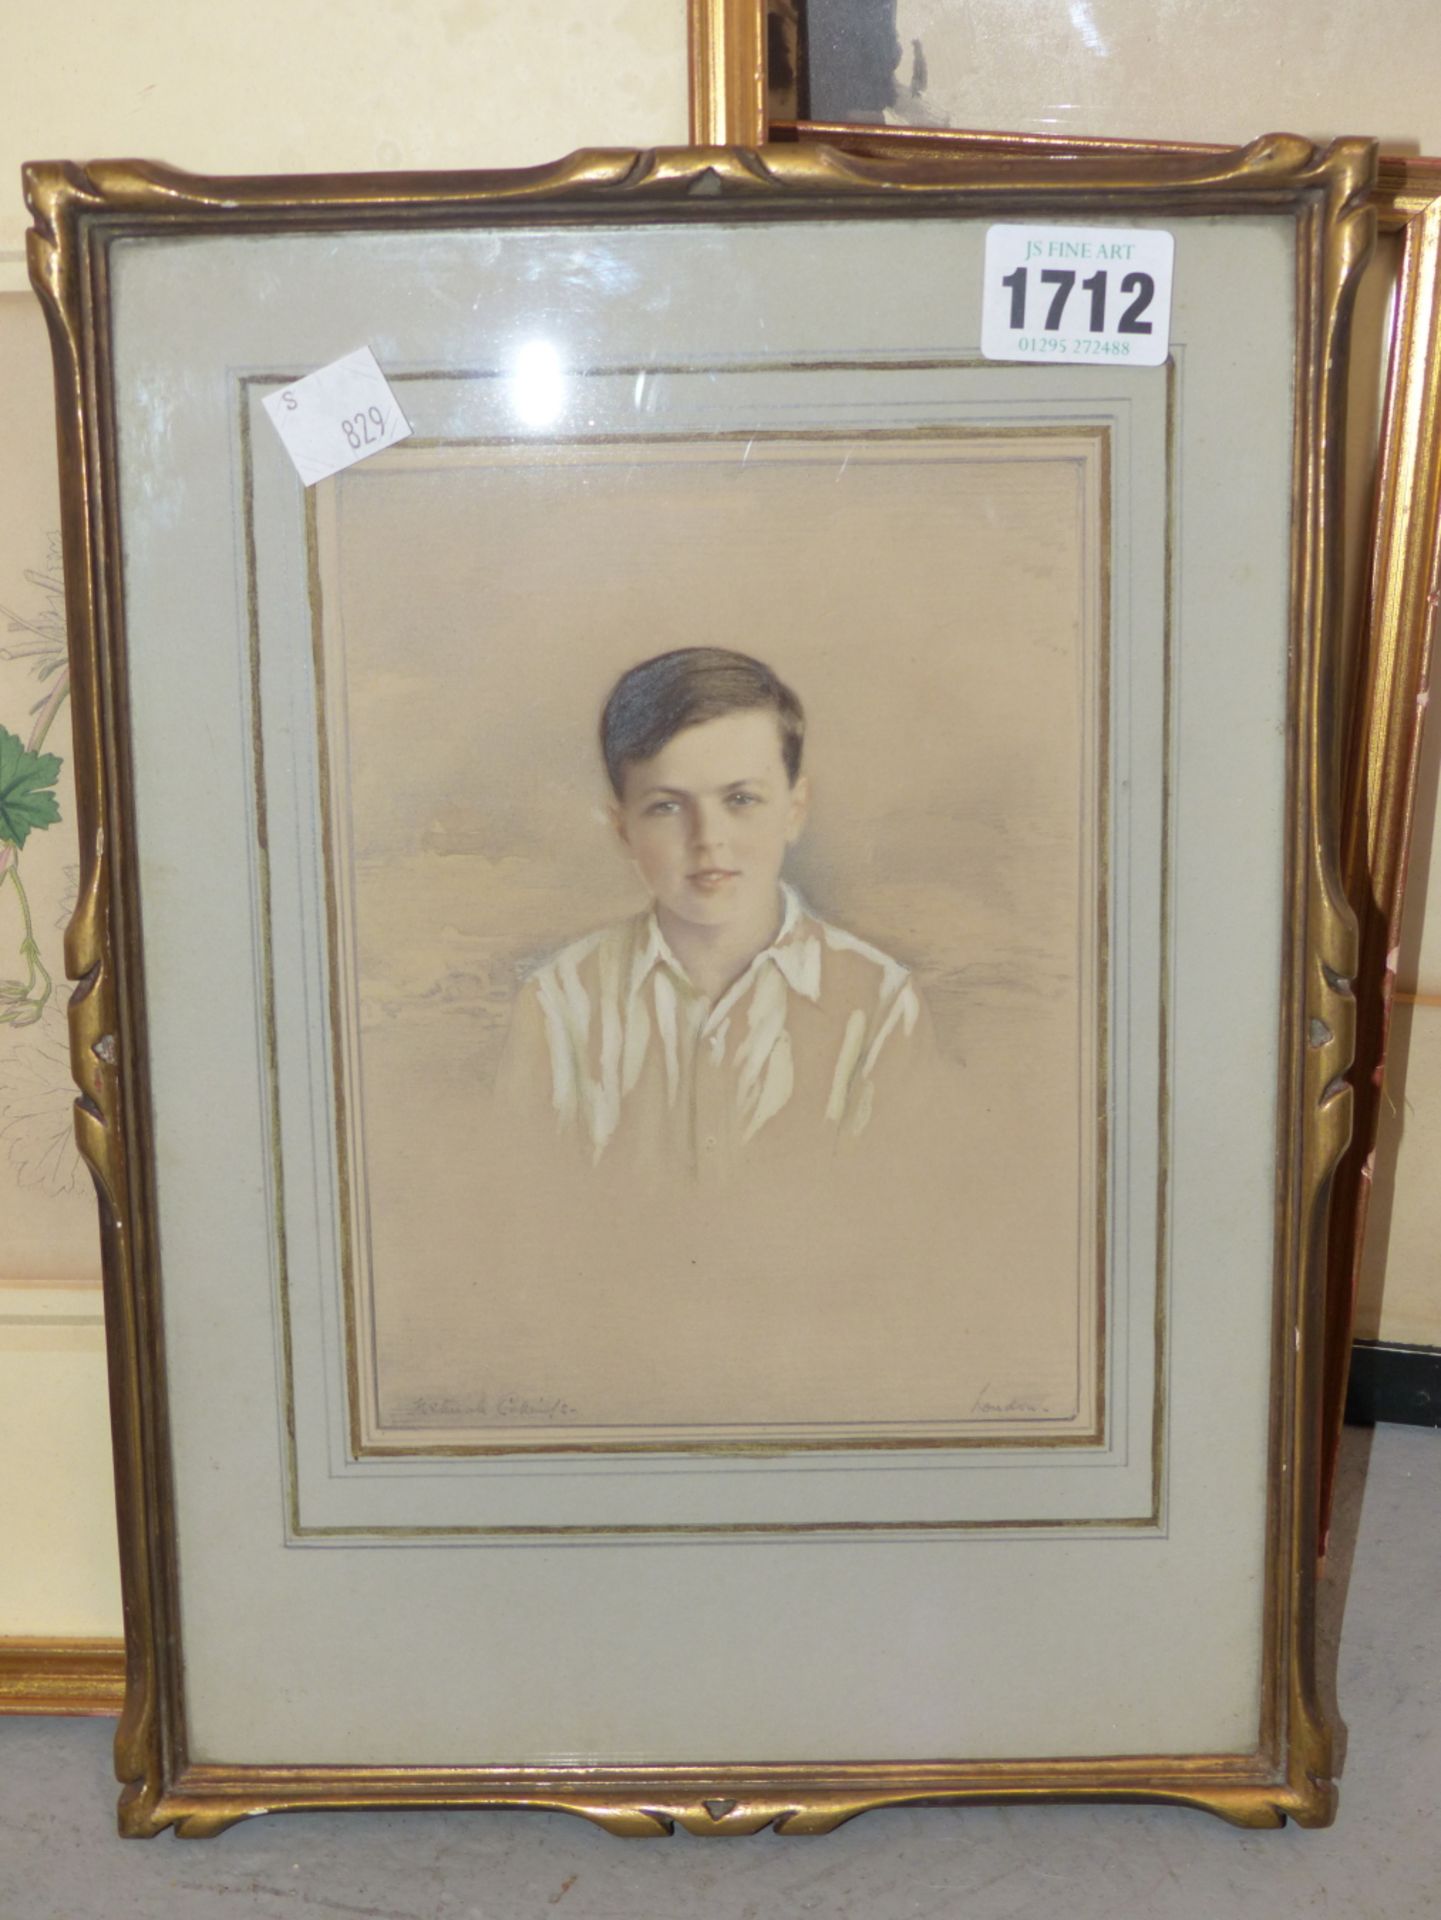 KETURAH ANN COLLINGS, BRITISH 1862-1948. PORTRAIT OF A BOY DATED 1932 VERSO. GRAPHITE AND WASH, 18 X - Image 3 of 3